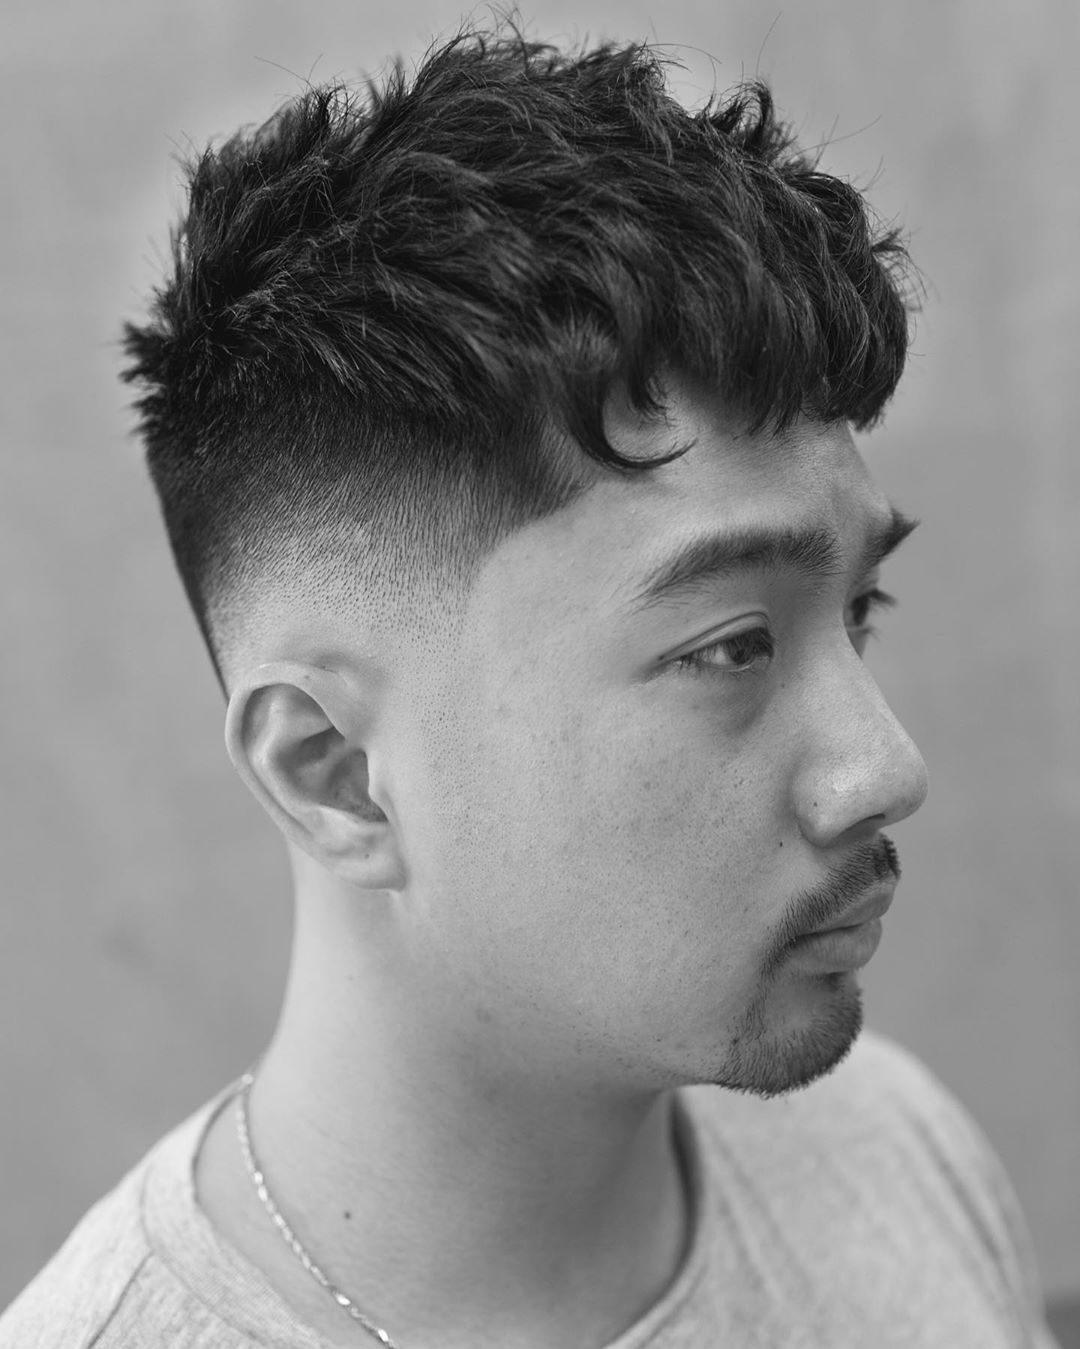 The 20 Best Asian Men's Hairstyles for 2023 - The Modest Man